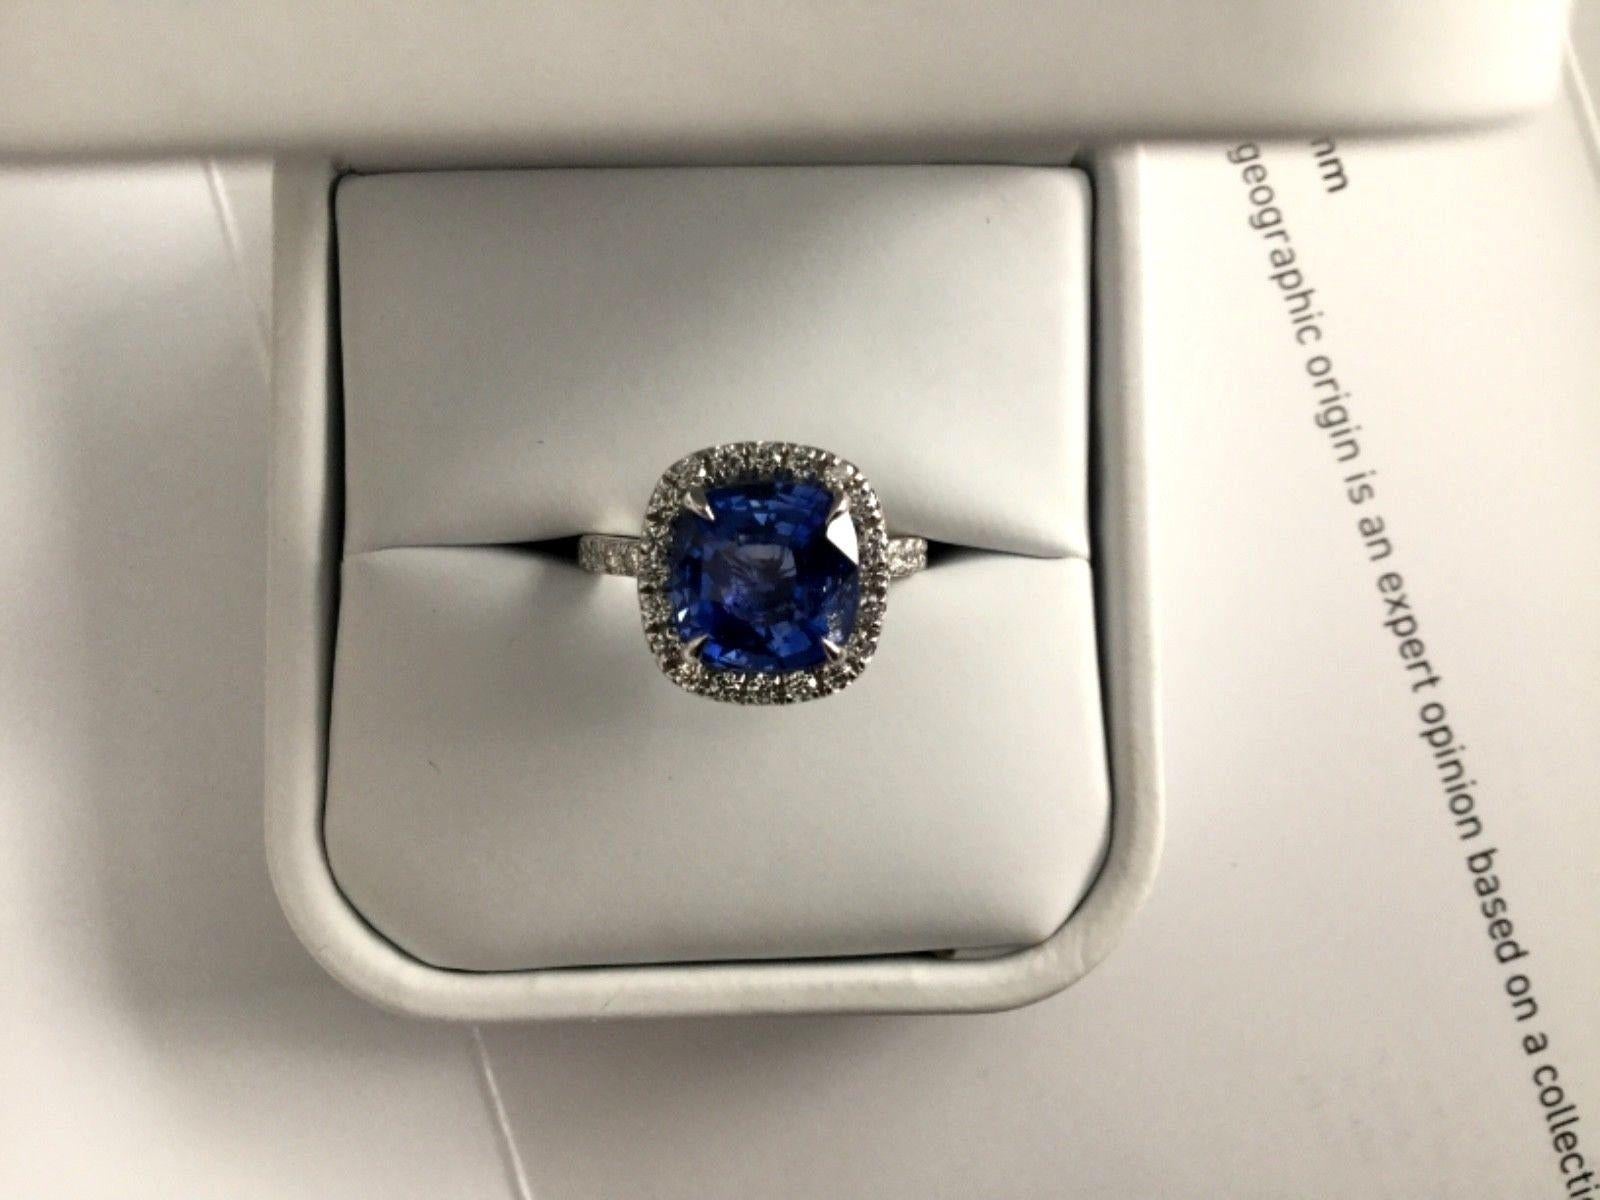 5.21 Carat Unheated Natural Blue Sapphire and Diamond Ring GIA Certified 5